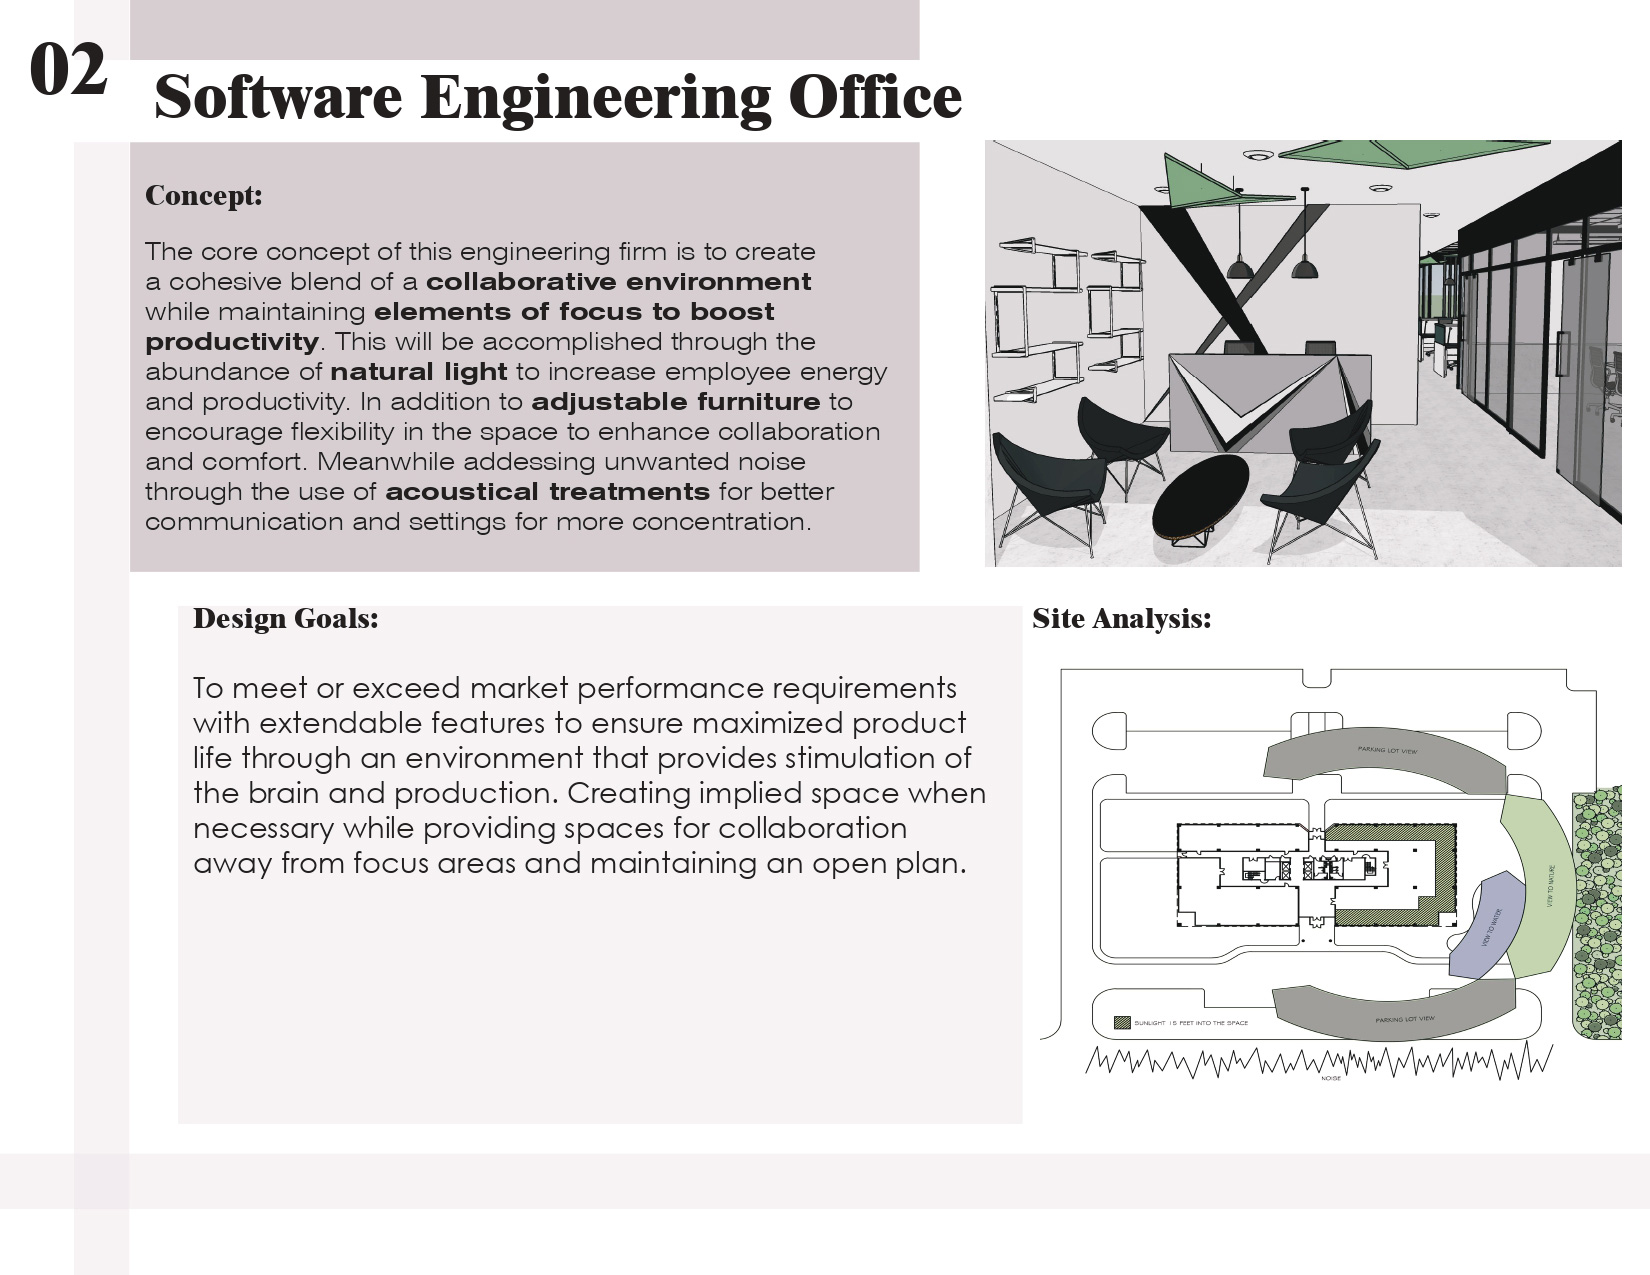 Designs for software engineering office